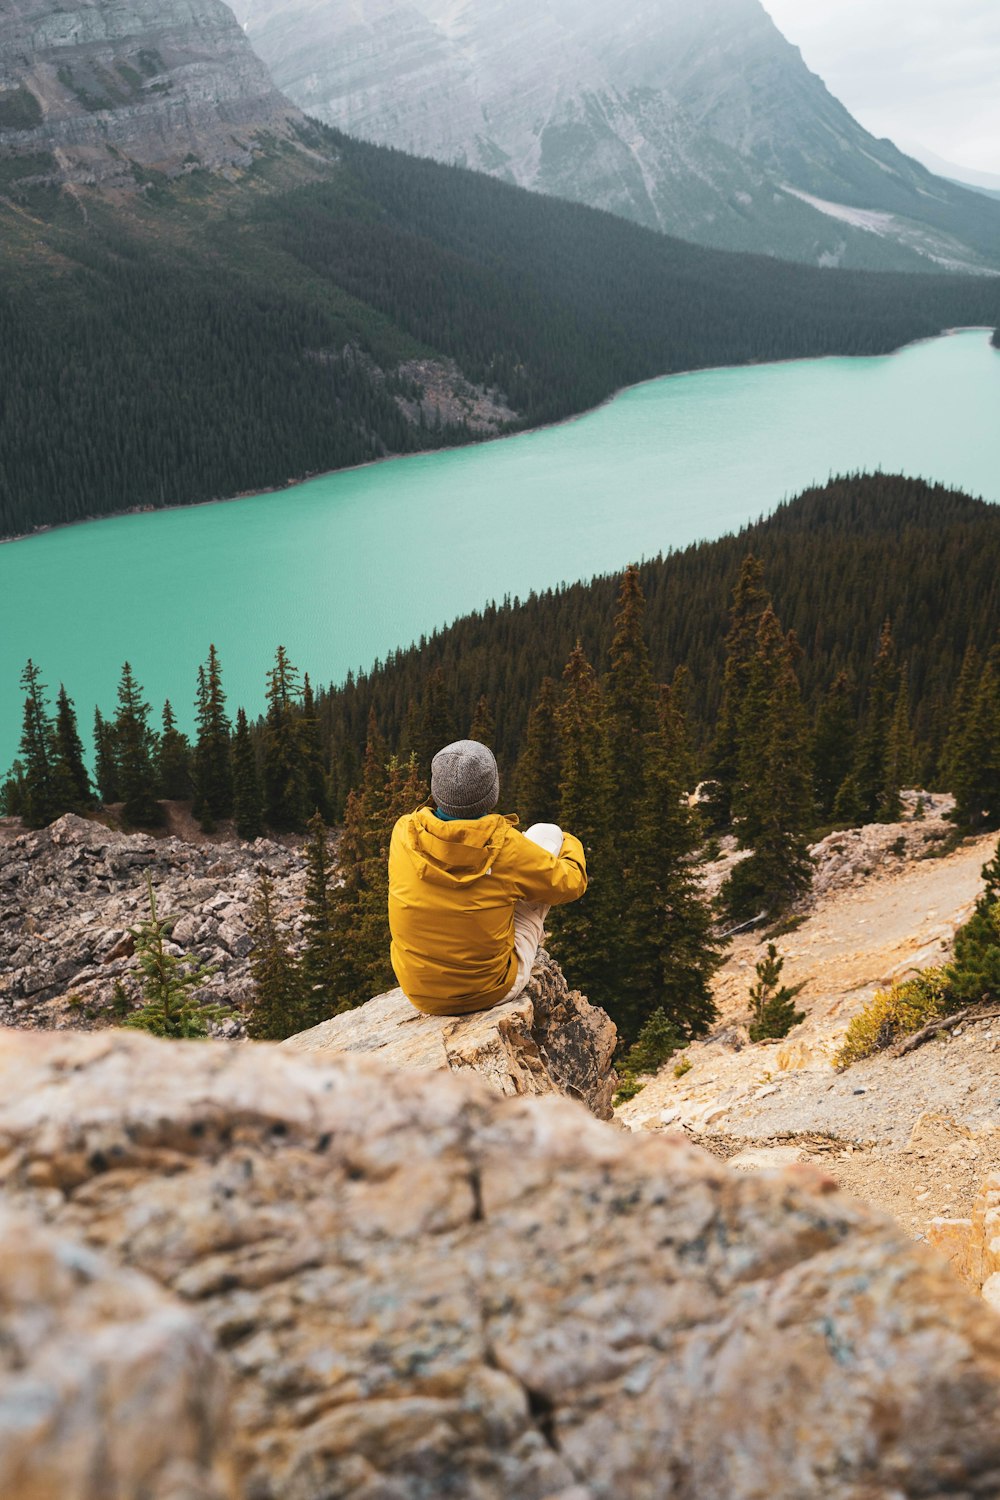 a person sitting on a rock overlooking a lake